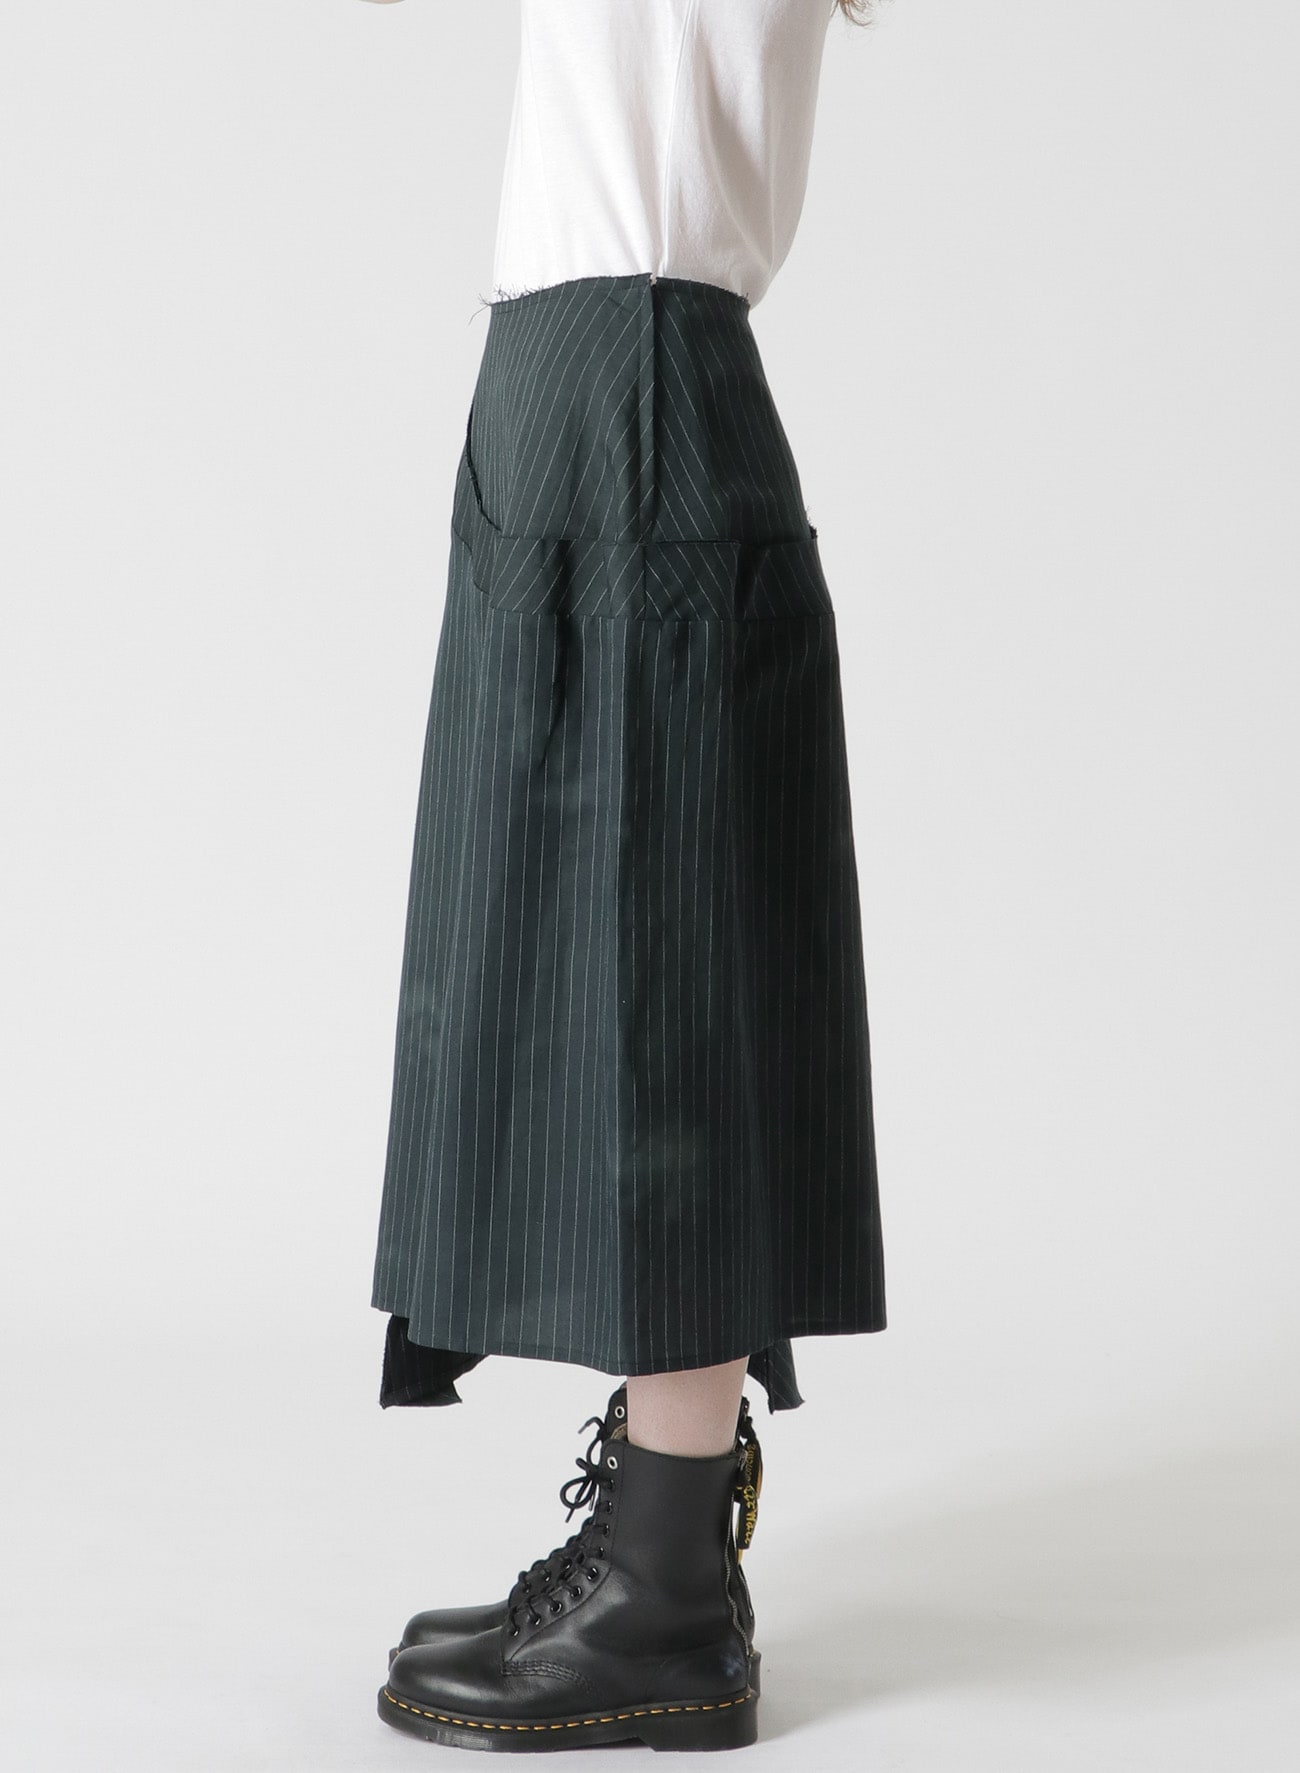 LINEN COTTON PIN-STRIPED UNEVEN DYEING PANELLED FLARE SKIRT